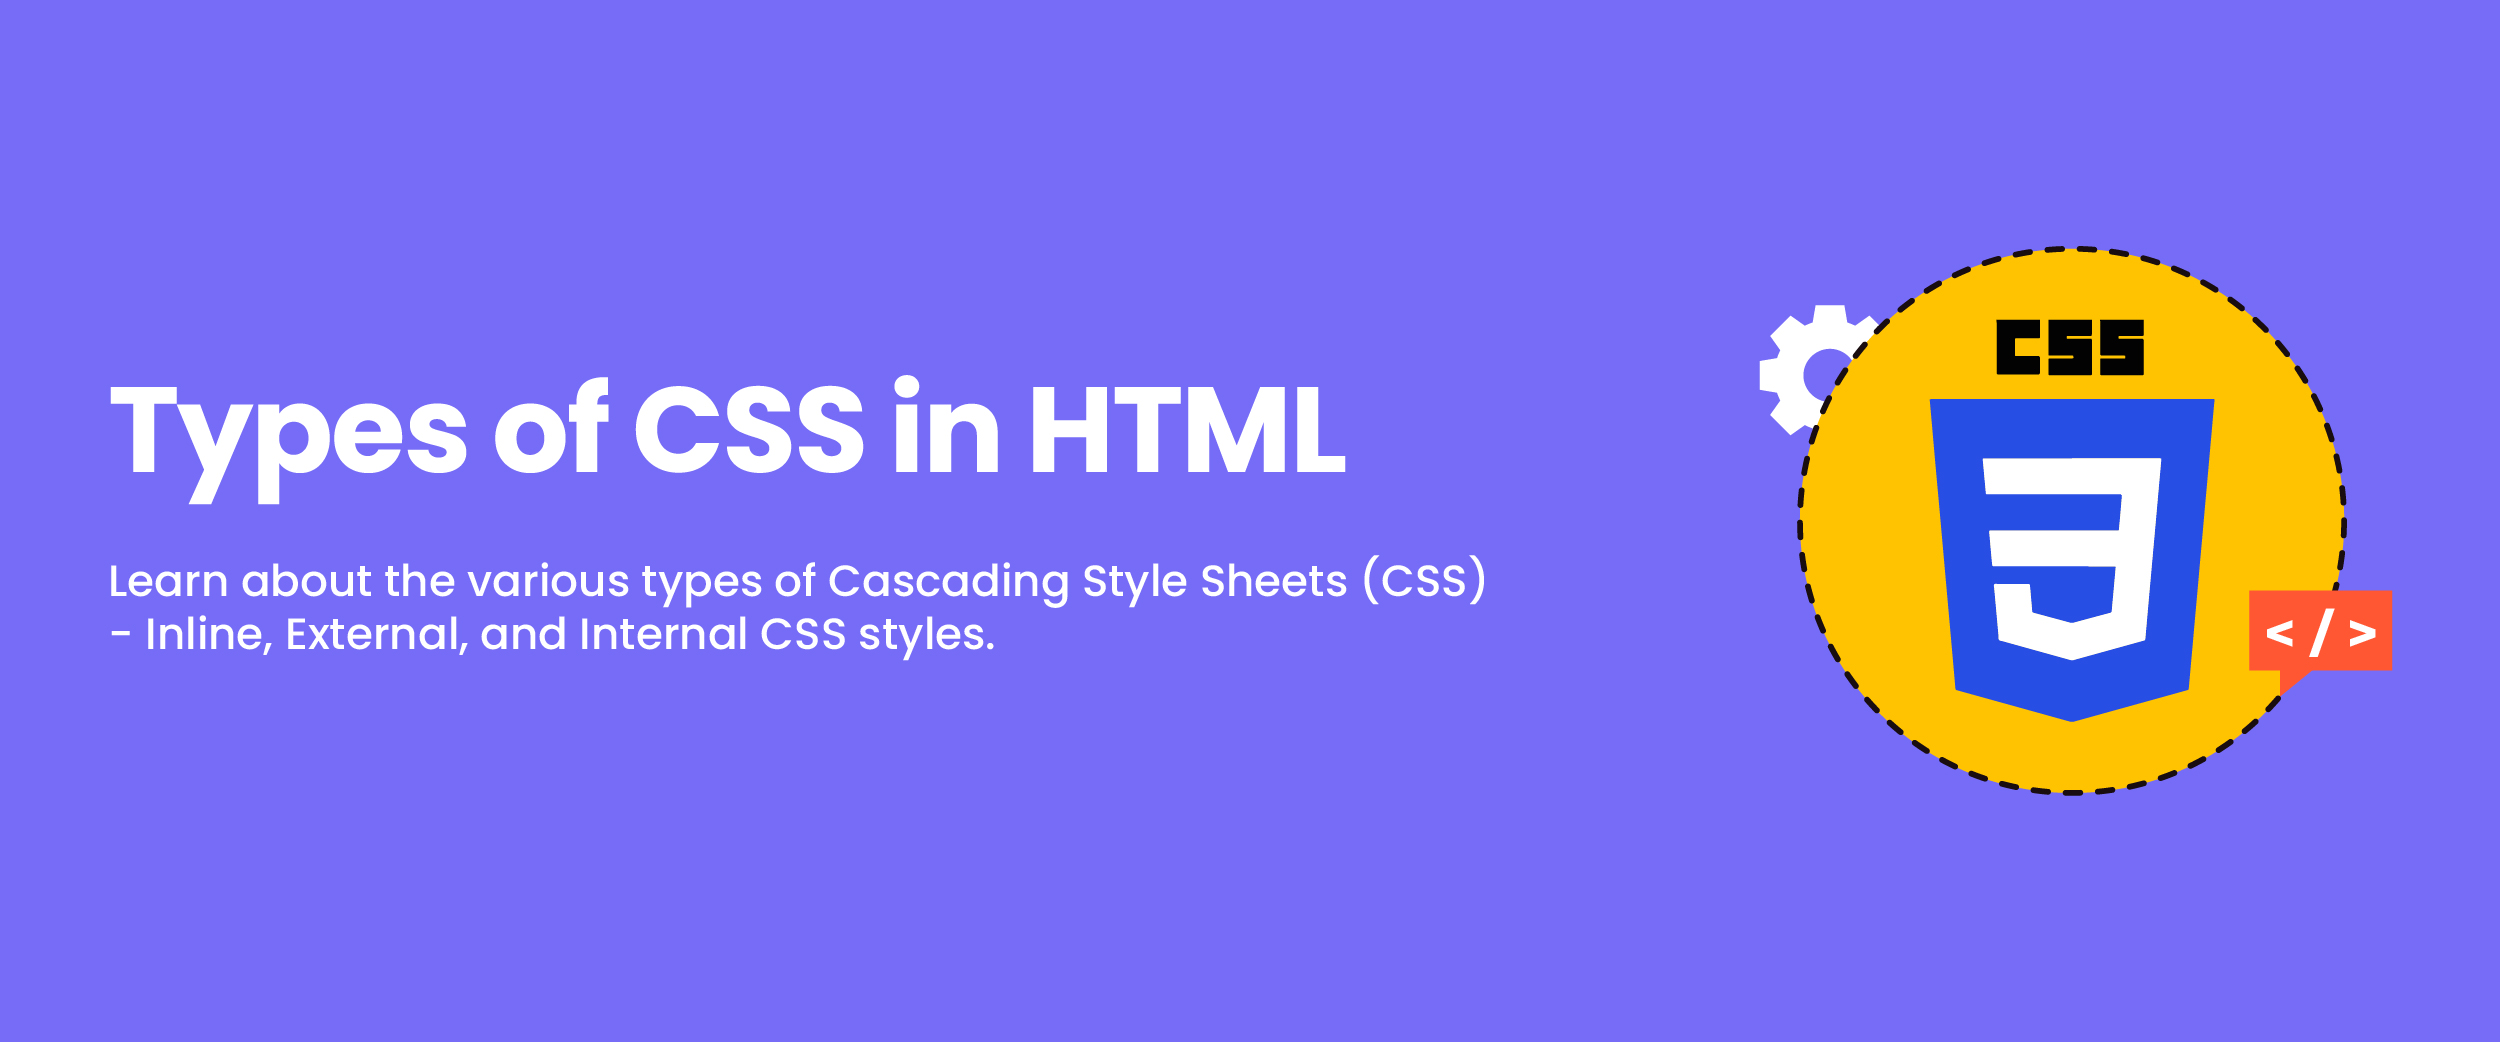 Types of CSS in HTML